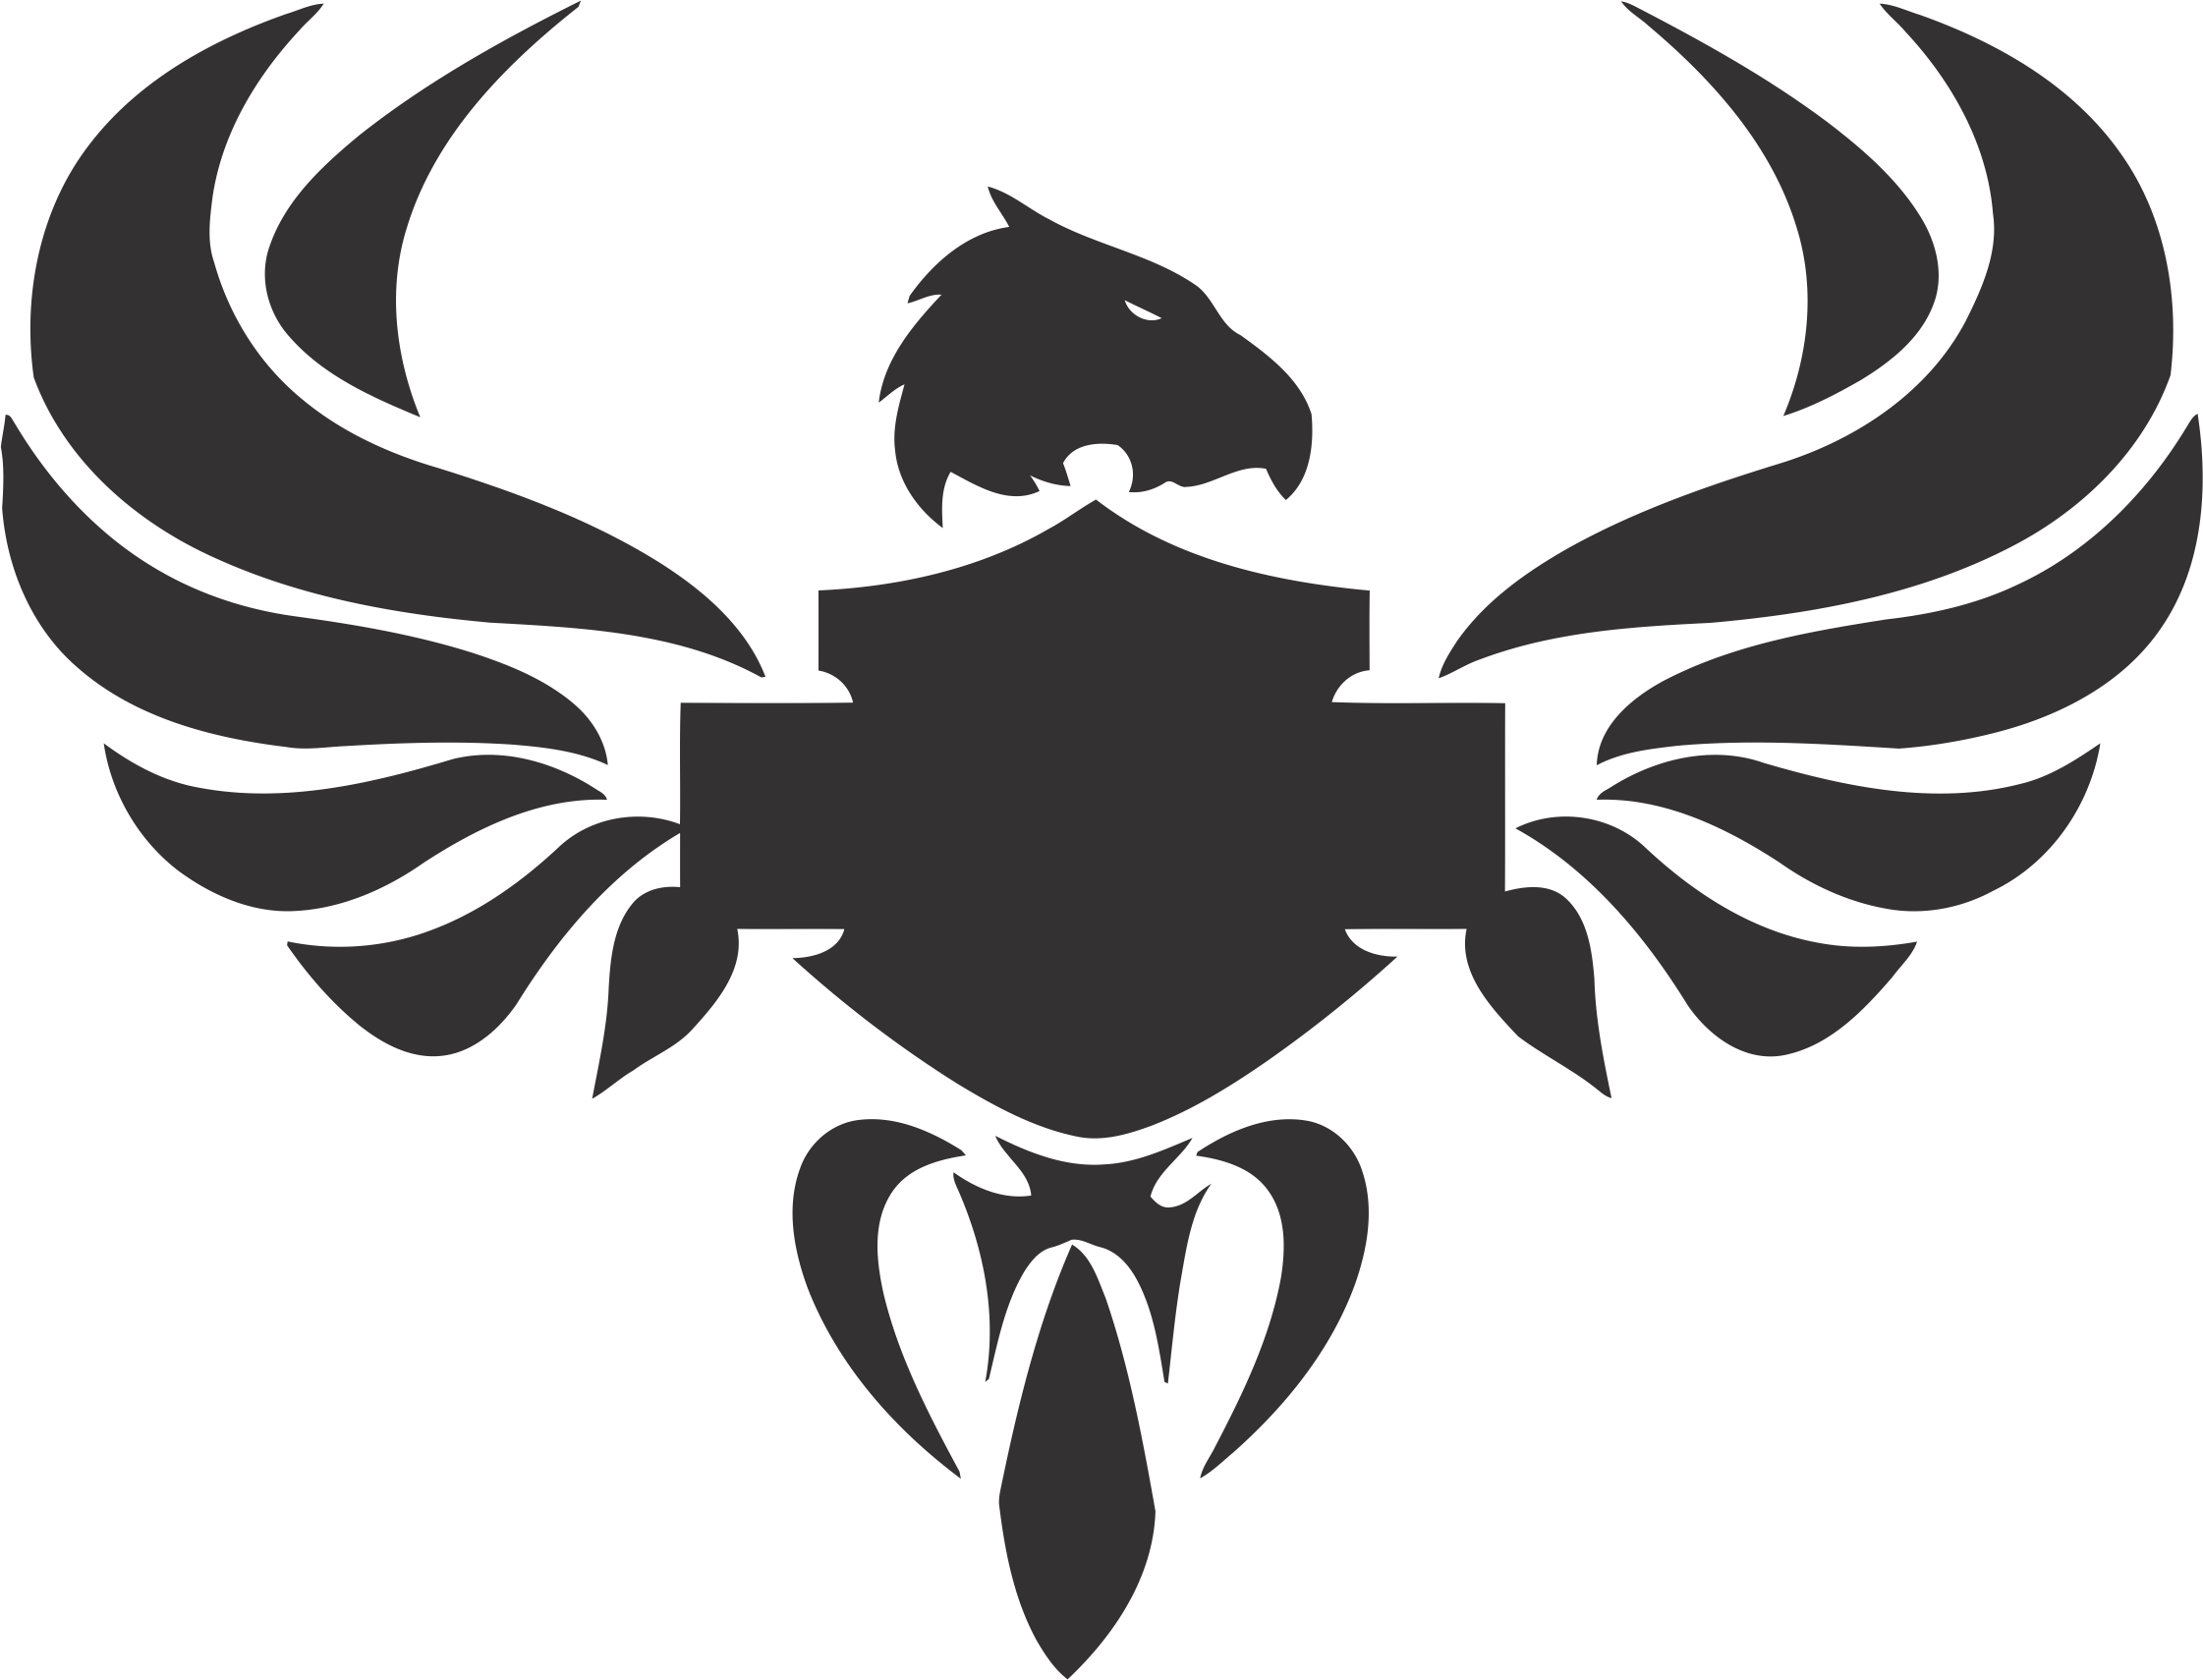 harley davidson symbol with wings
